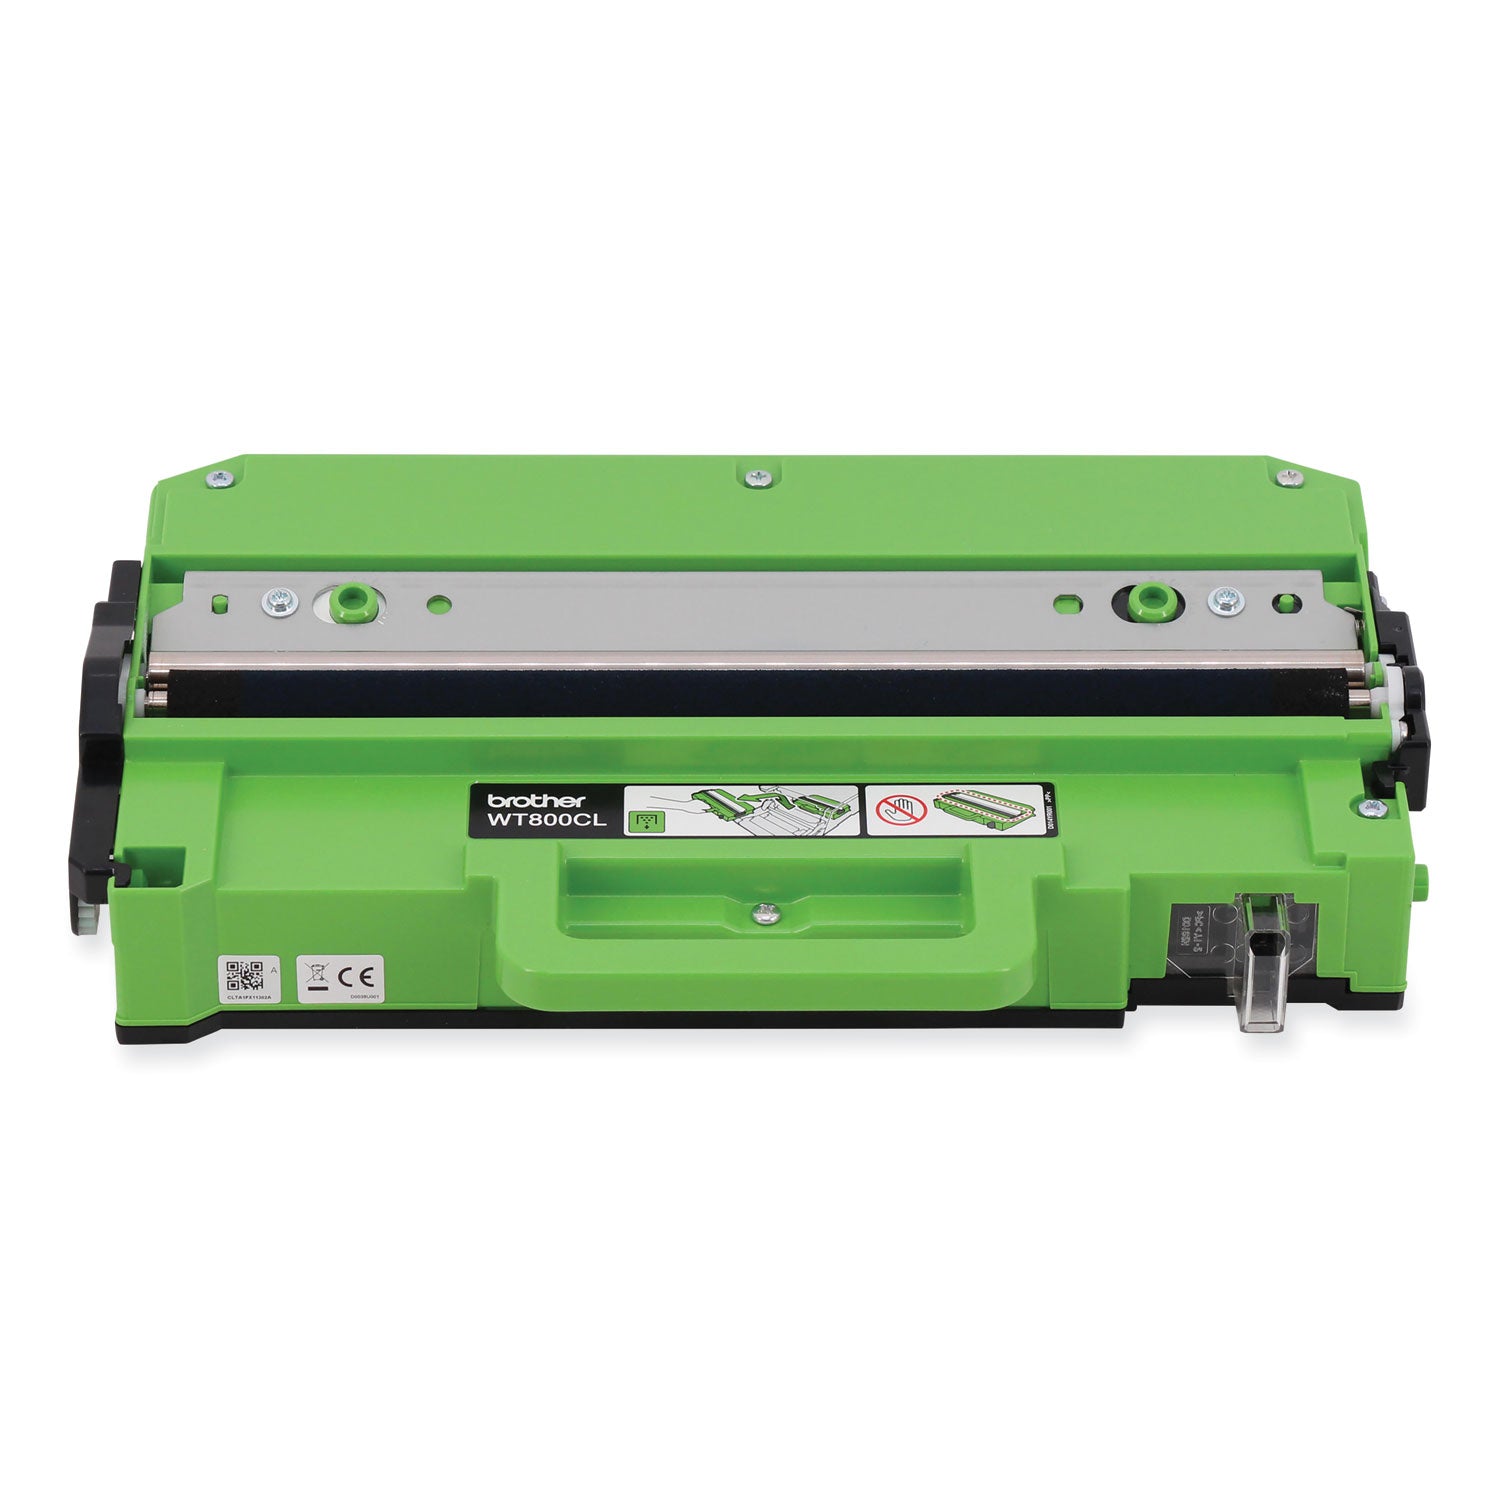 wt800cl-waste-toner-box-100000-page-yield_brtwt800cl - 1